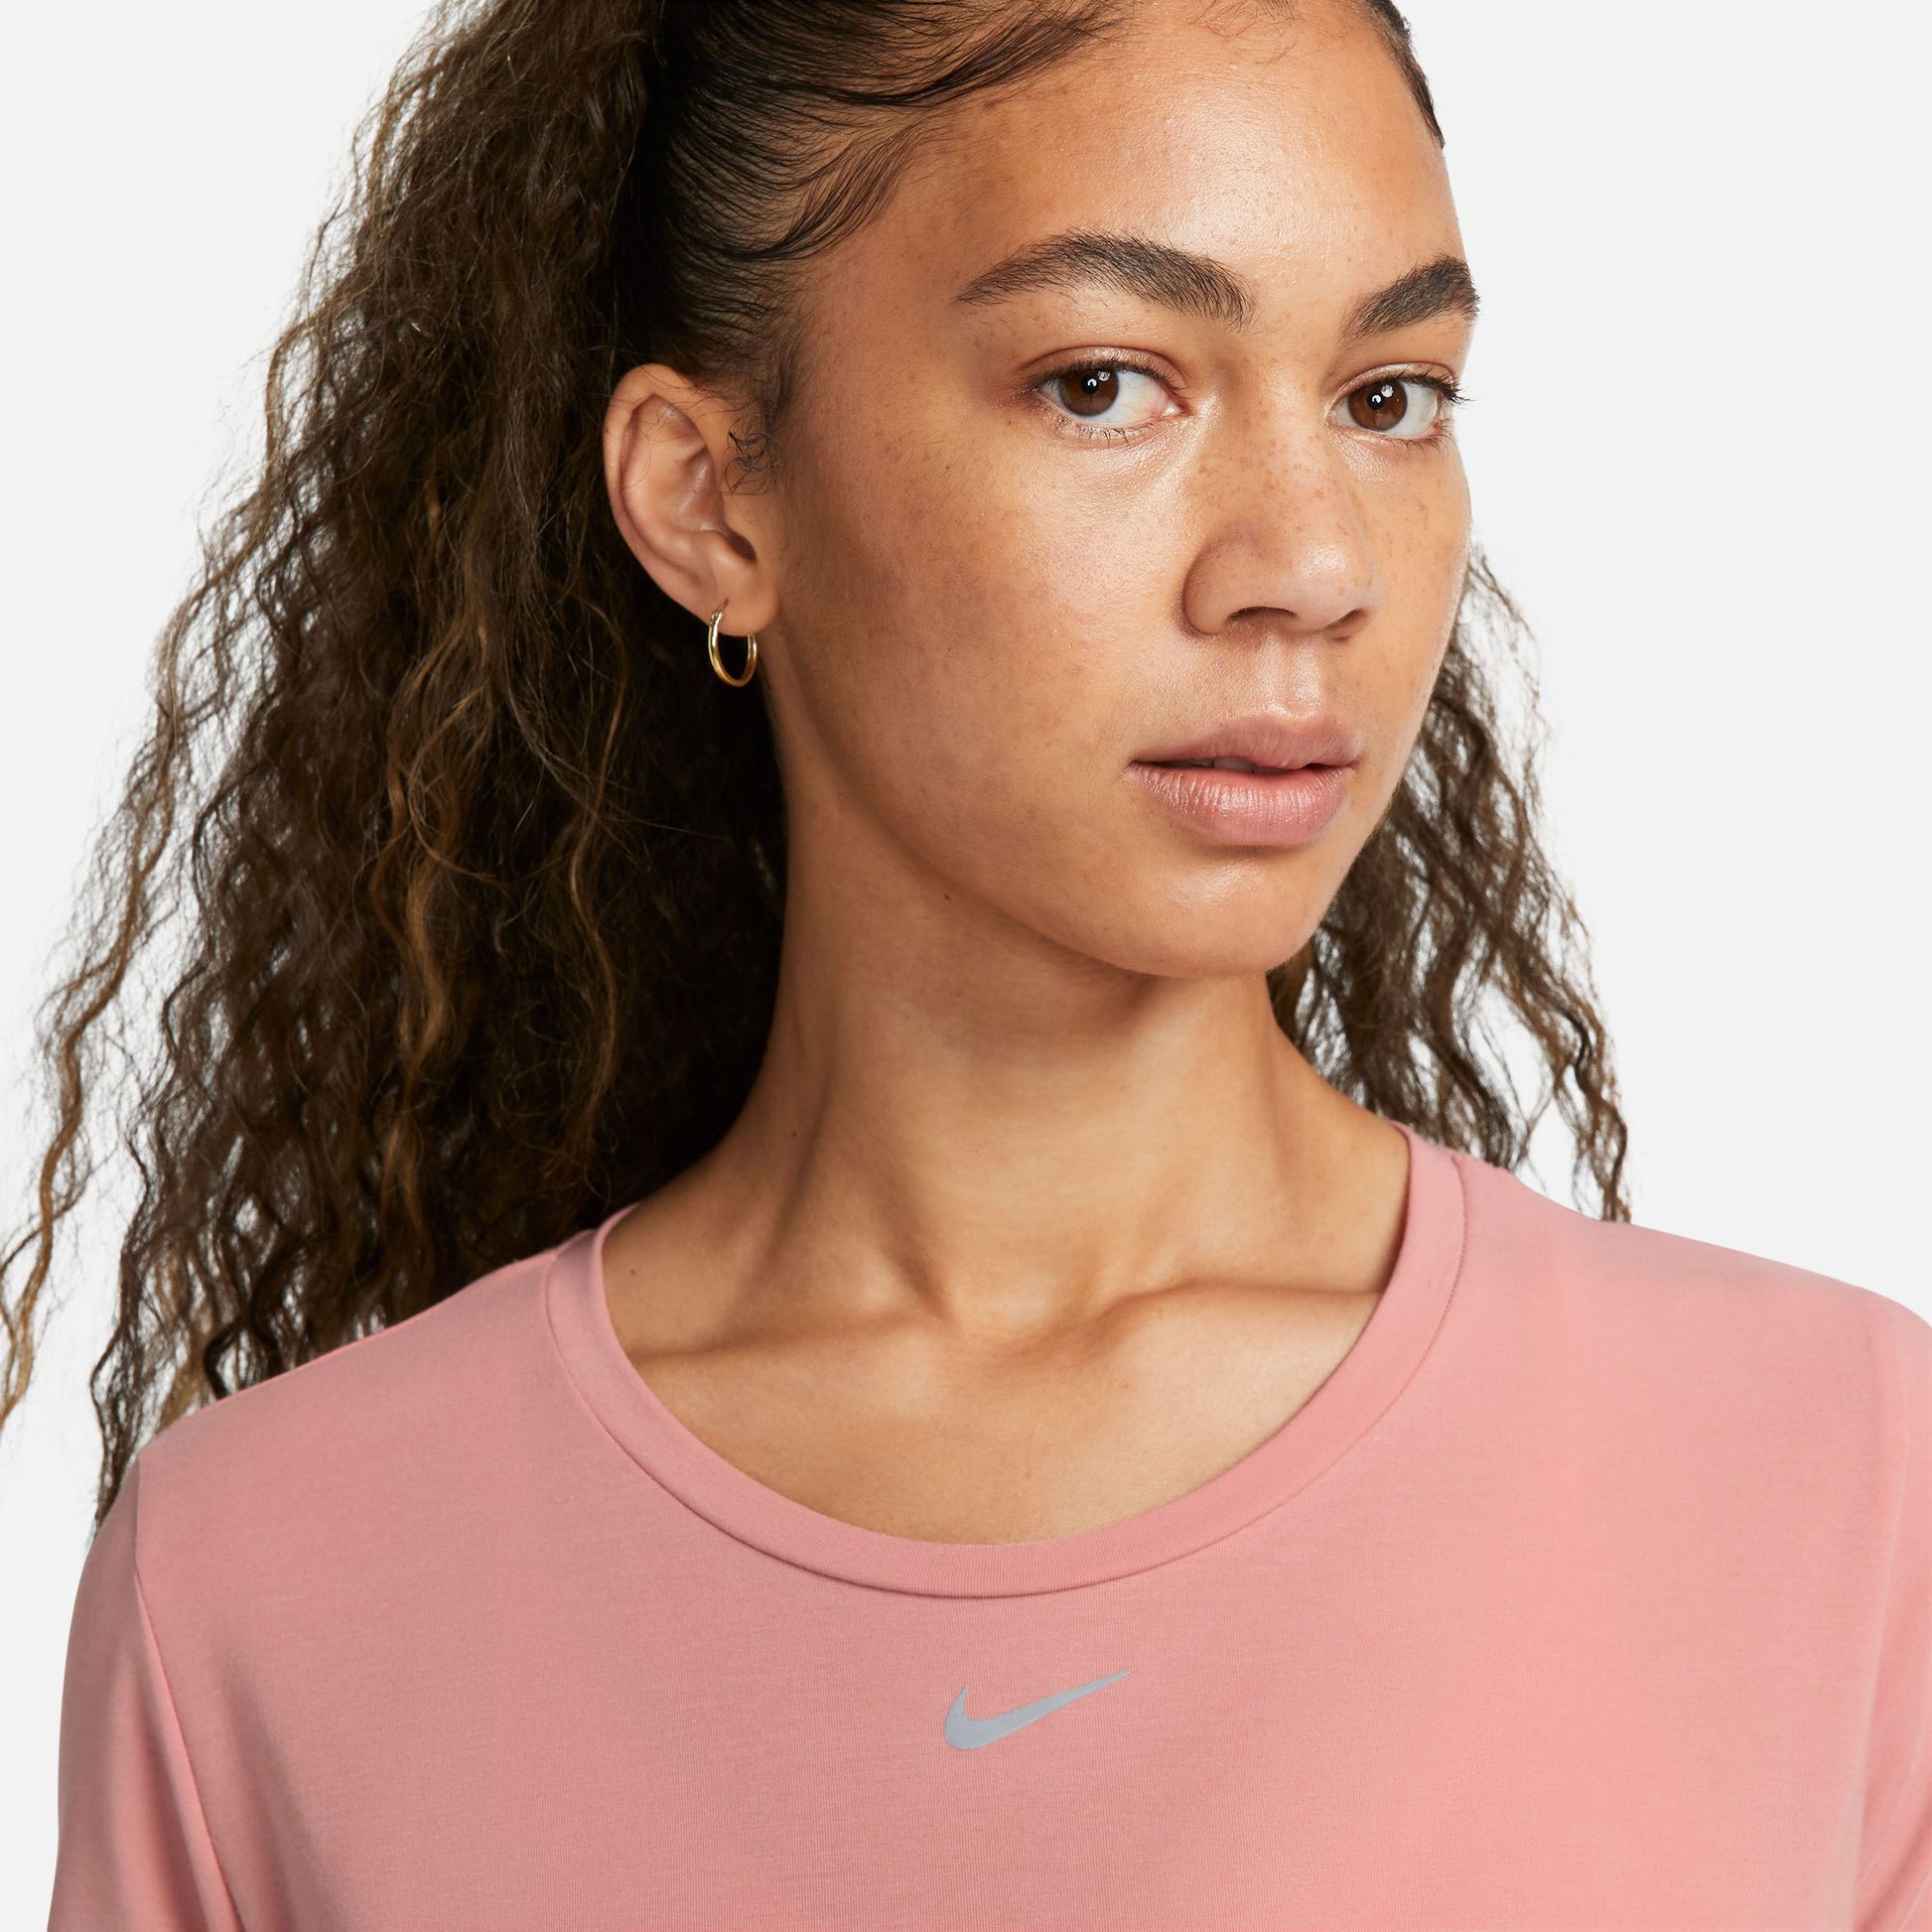 Nike One Luxe Dri-FIT Women's Standard Fit Shirt Pink (3)